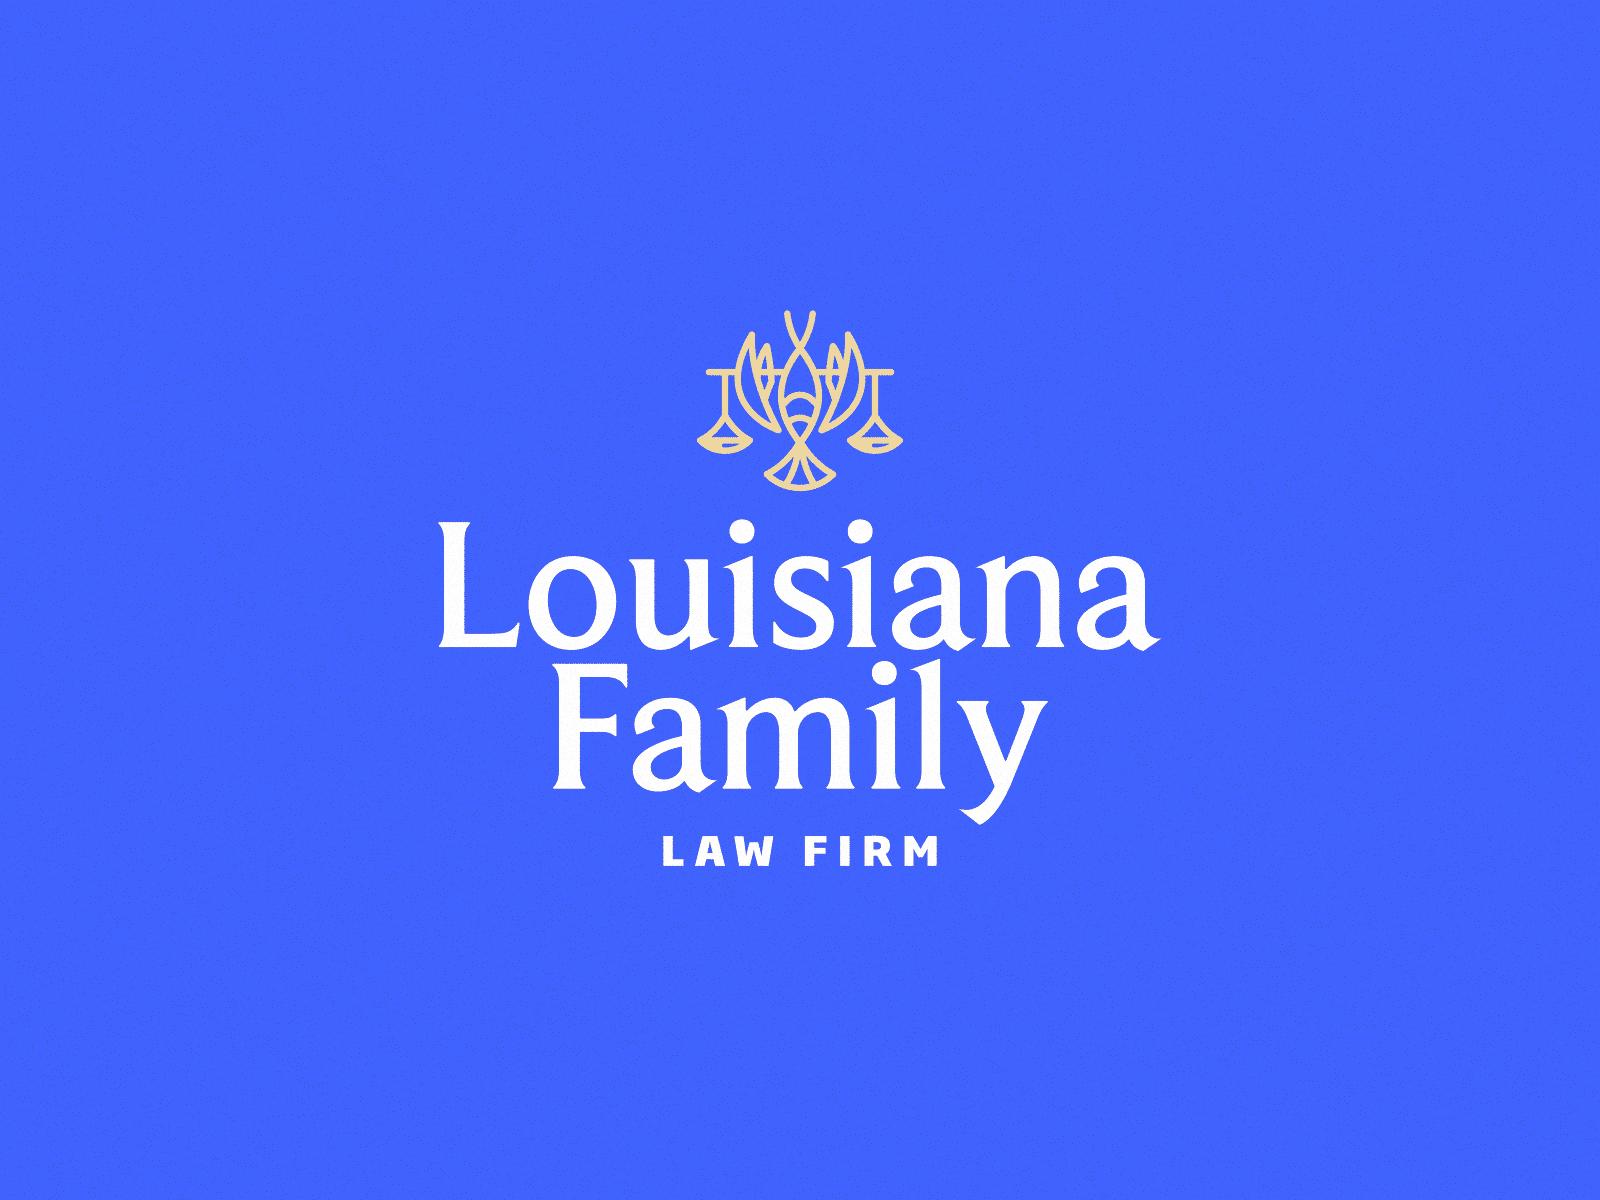 Louisiana Family Law Firm blue brand crawfish design firm icon illustration law lawyer logo mark pelican scale shield star typography vector